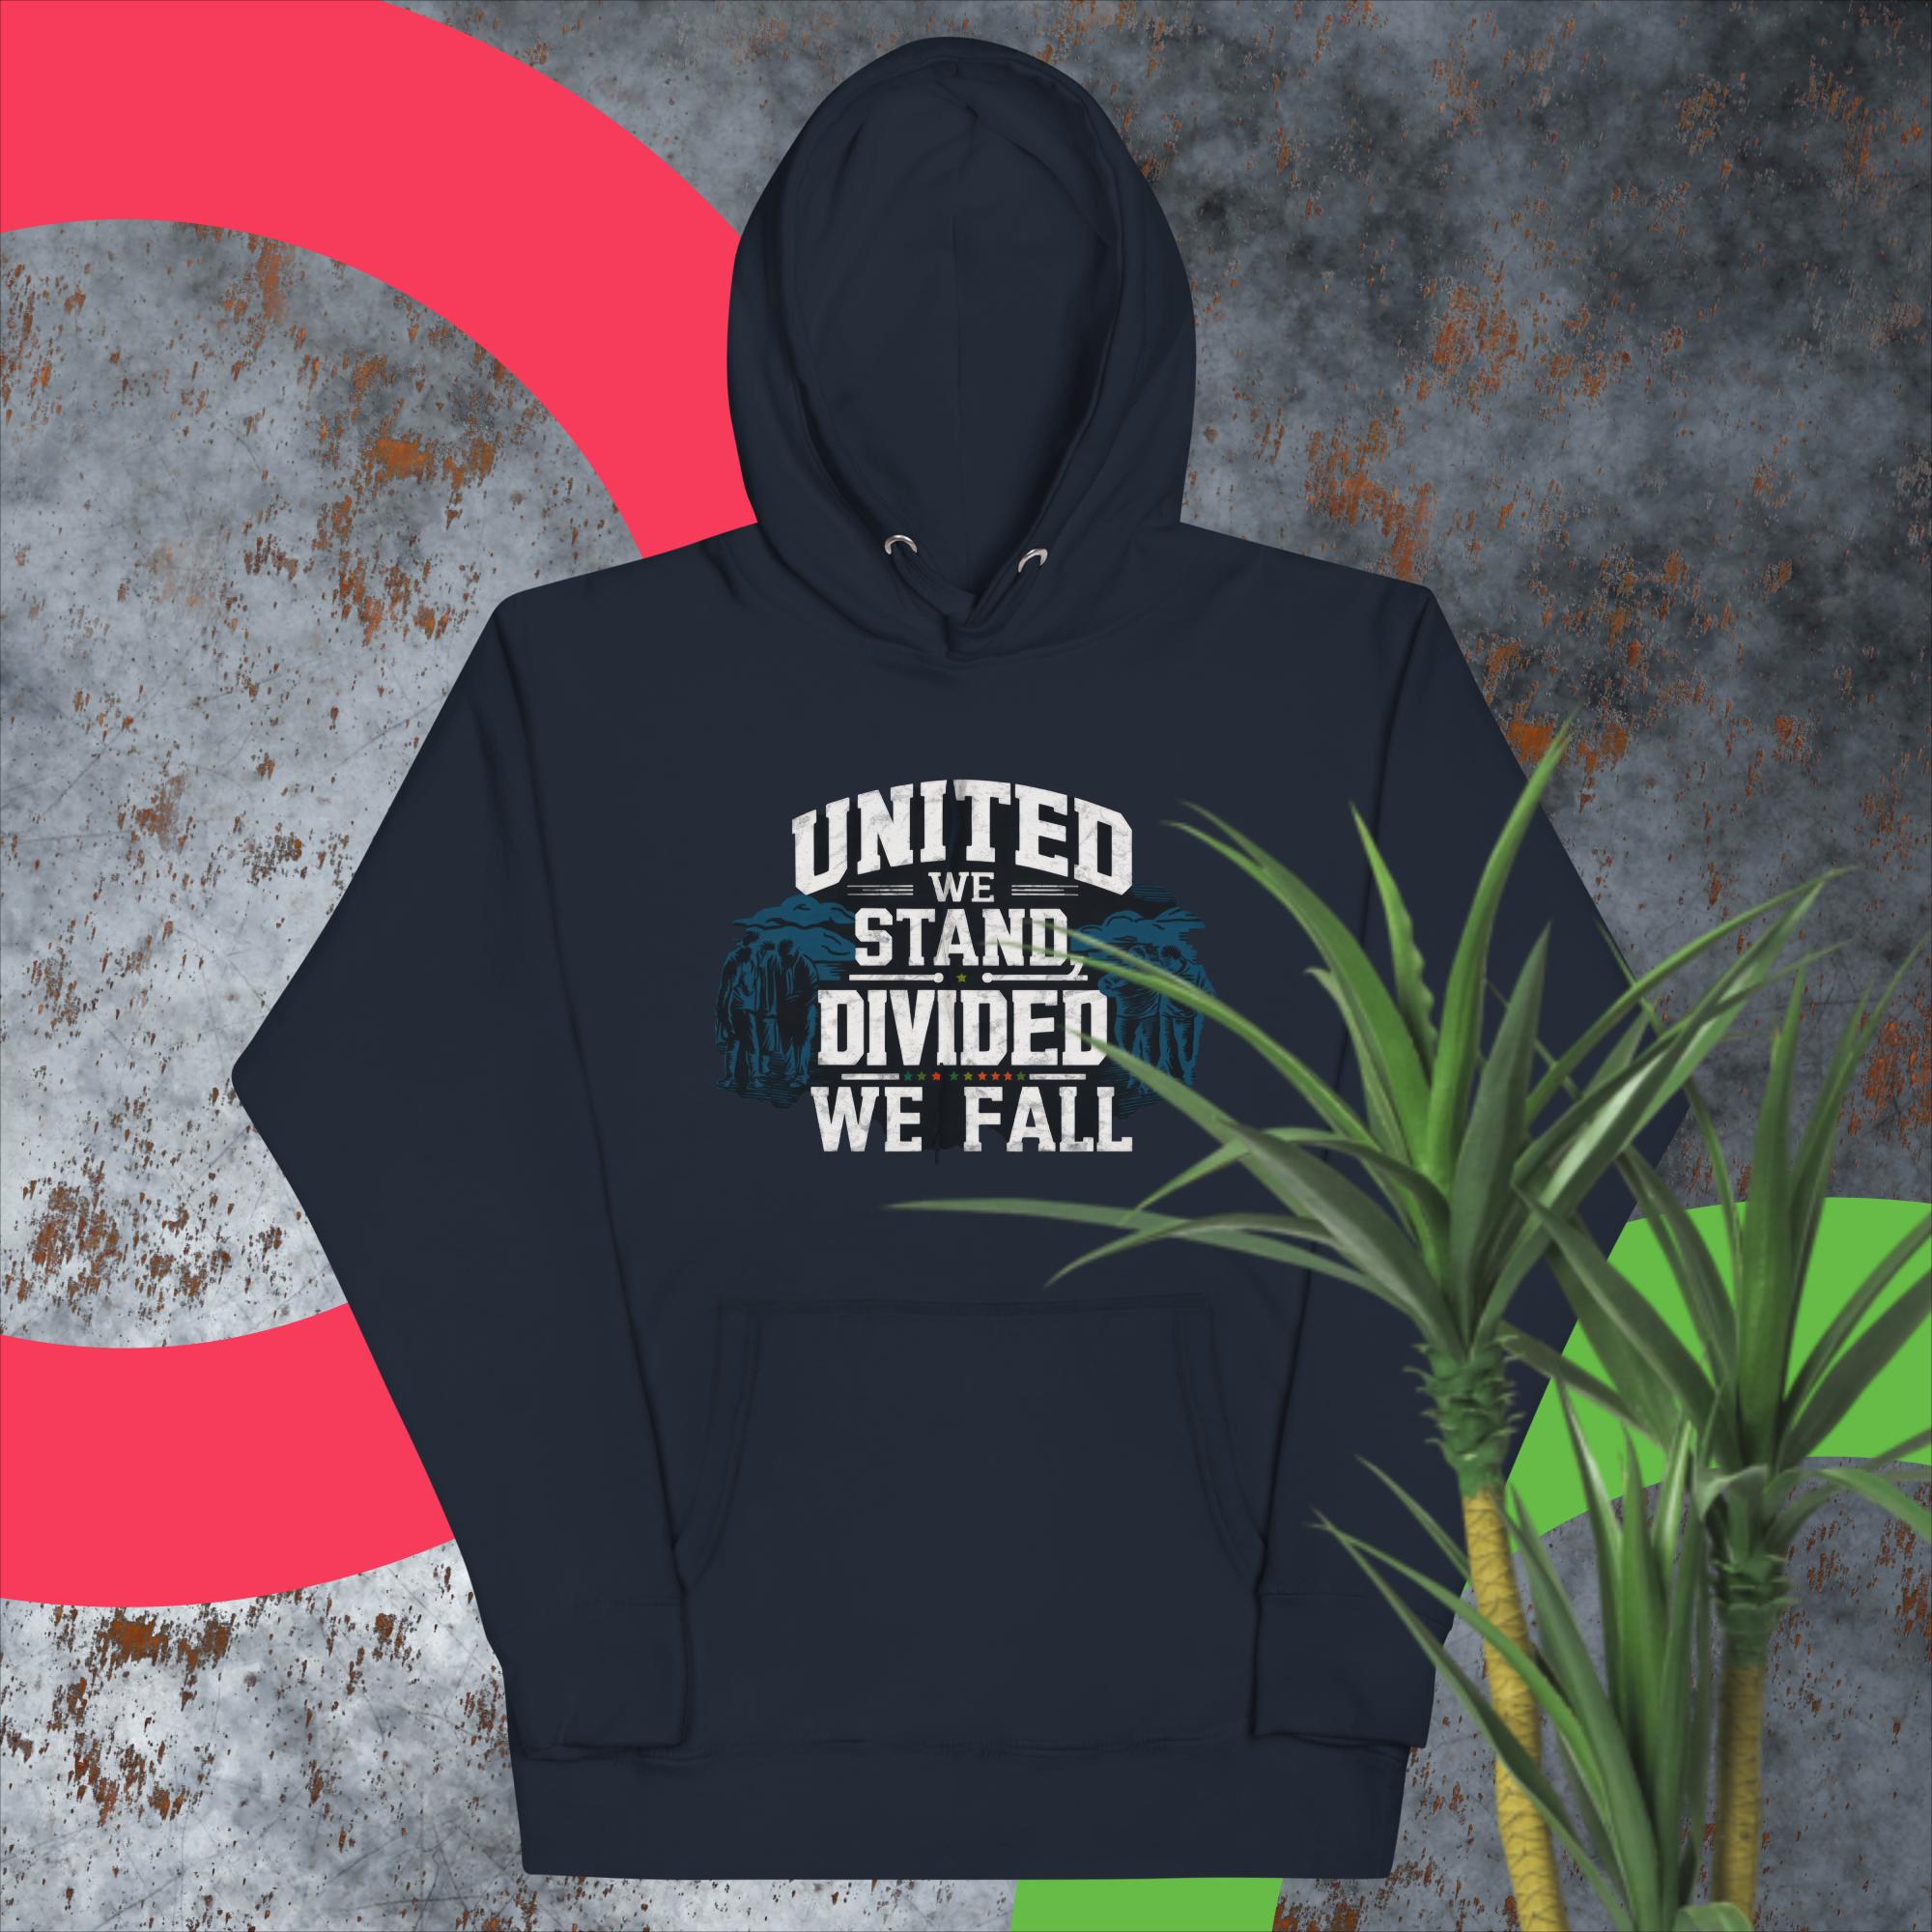 United We Stand, Divided We Fall - Unisex Hoodie